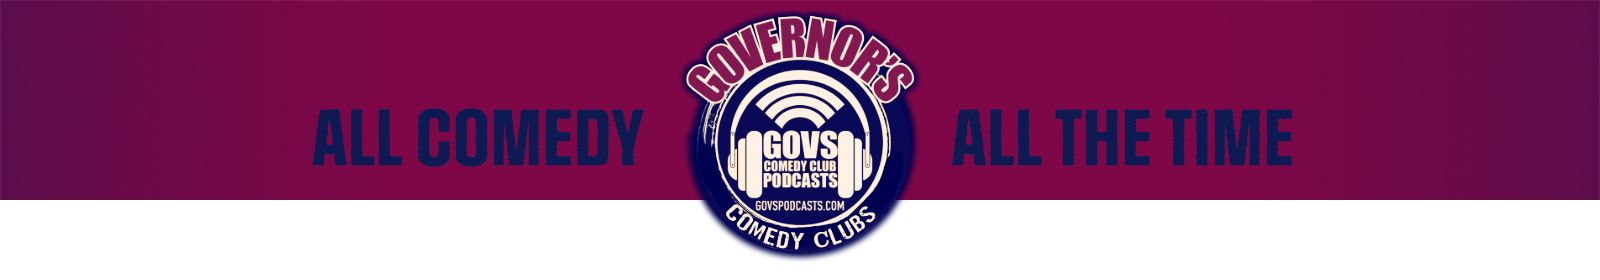 GovsRadio.com - All Comedy, All the Time